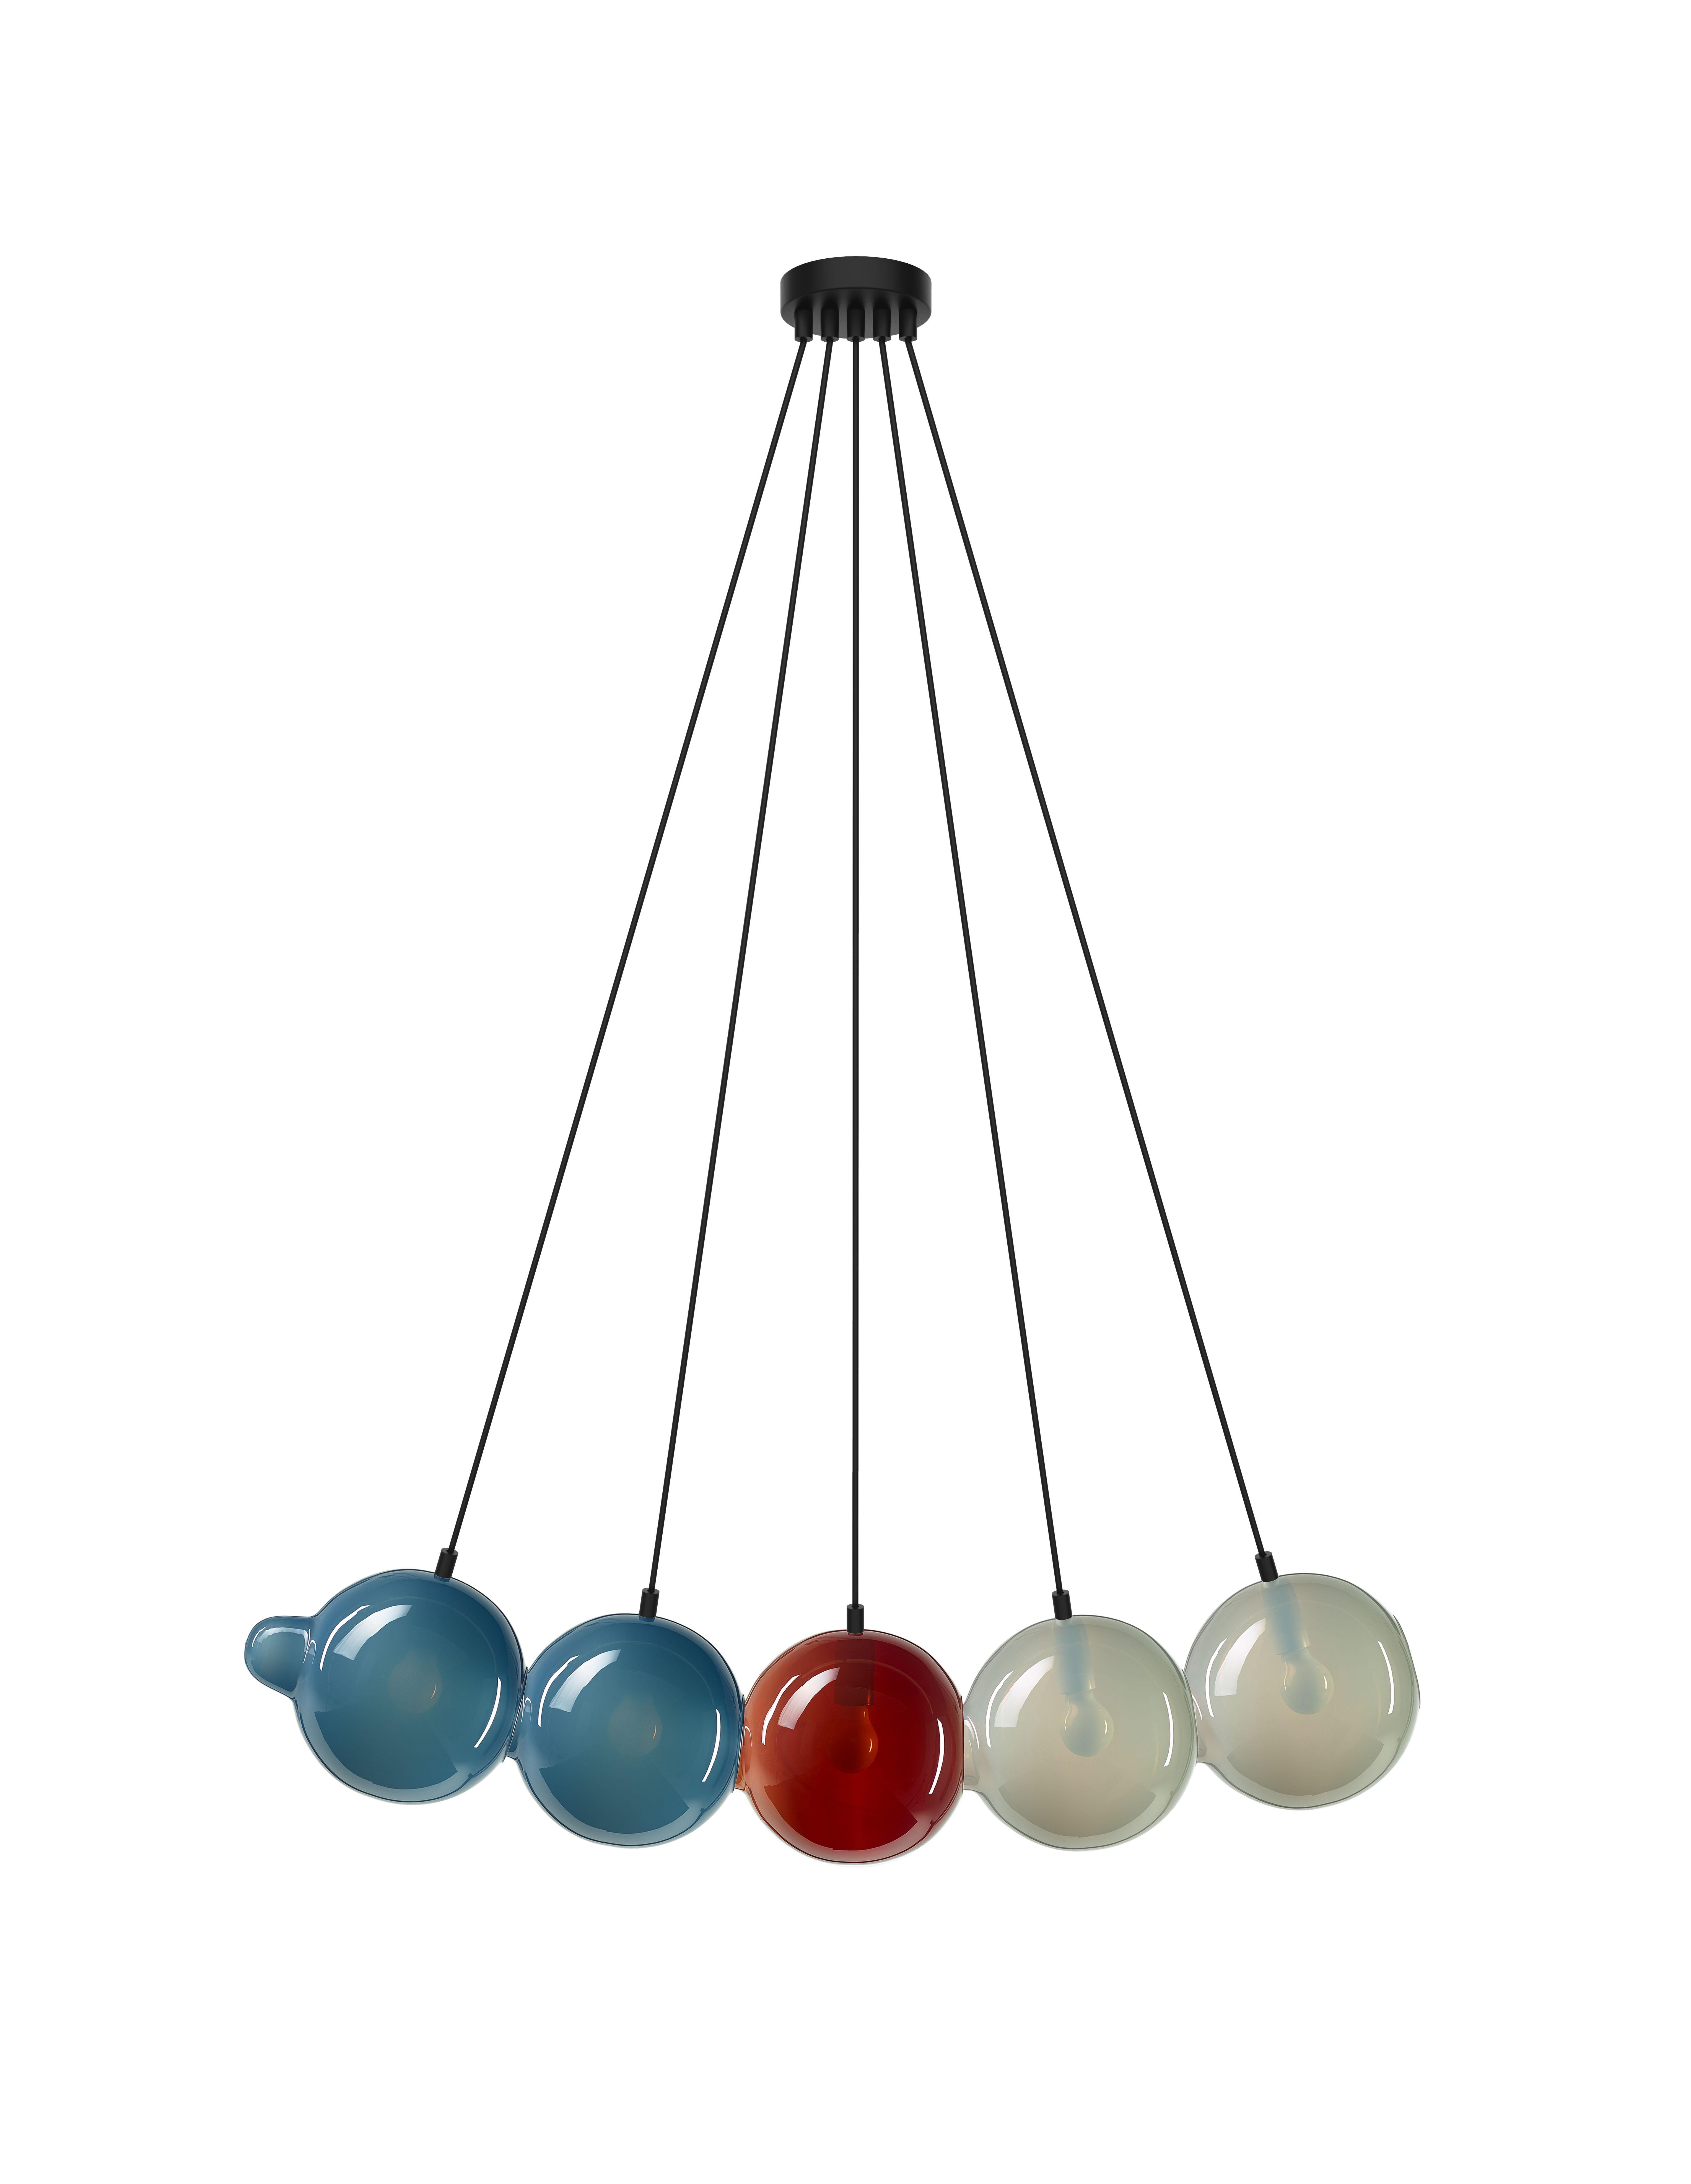 PENDULUM chandelier
Designed by Studio deFORM for Bomma

**new in-box, discontinued product, no longer manufactured**

Pendulum is the timeless play of balance  and energy. Although inspired by Newton’s cradle, demonstrating the conservation of